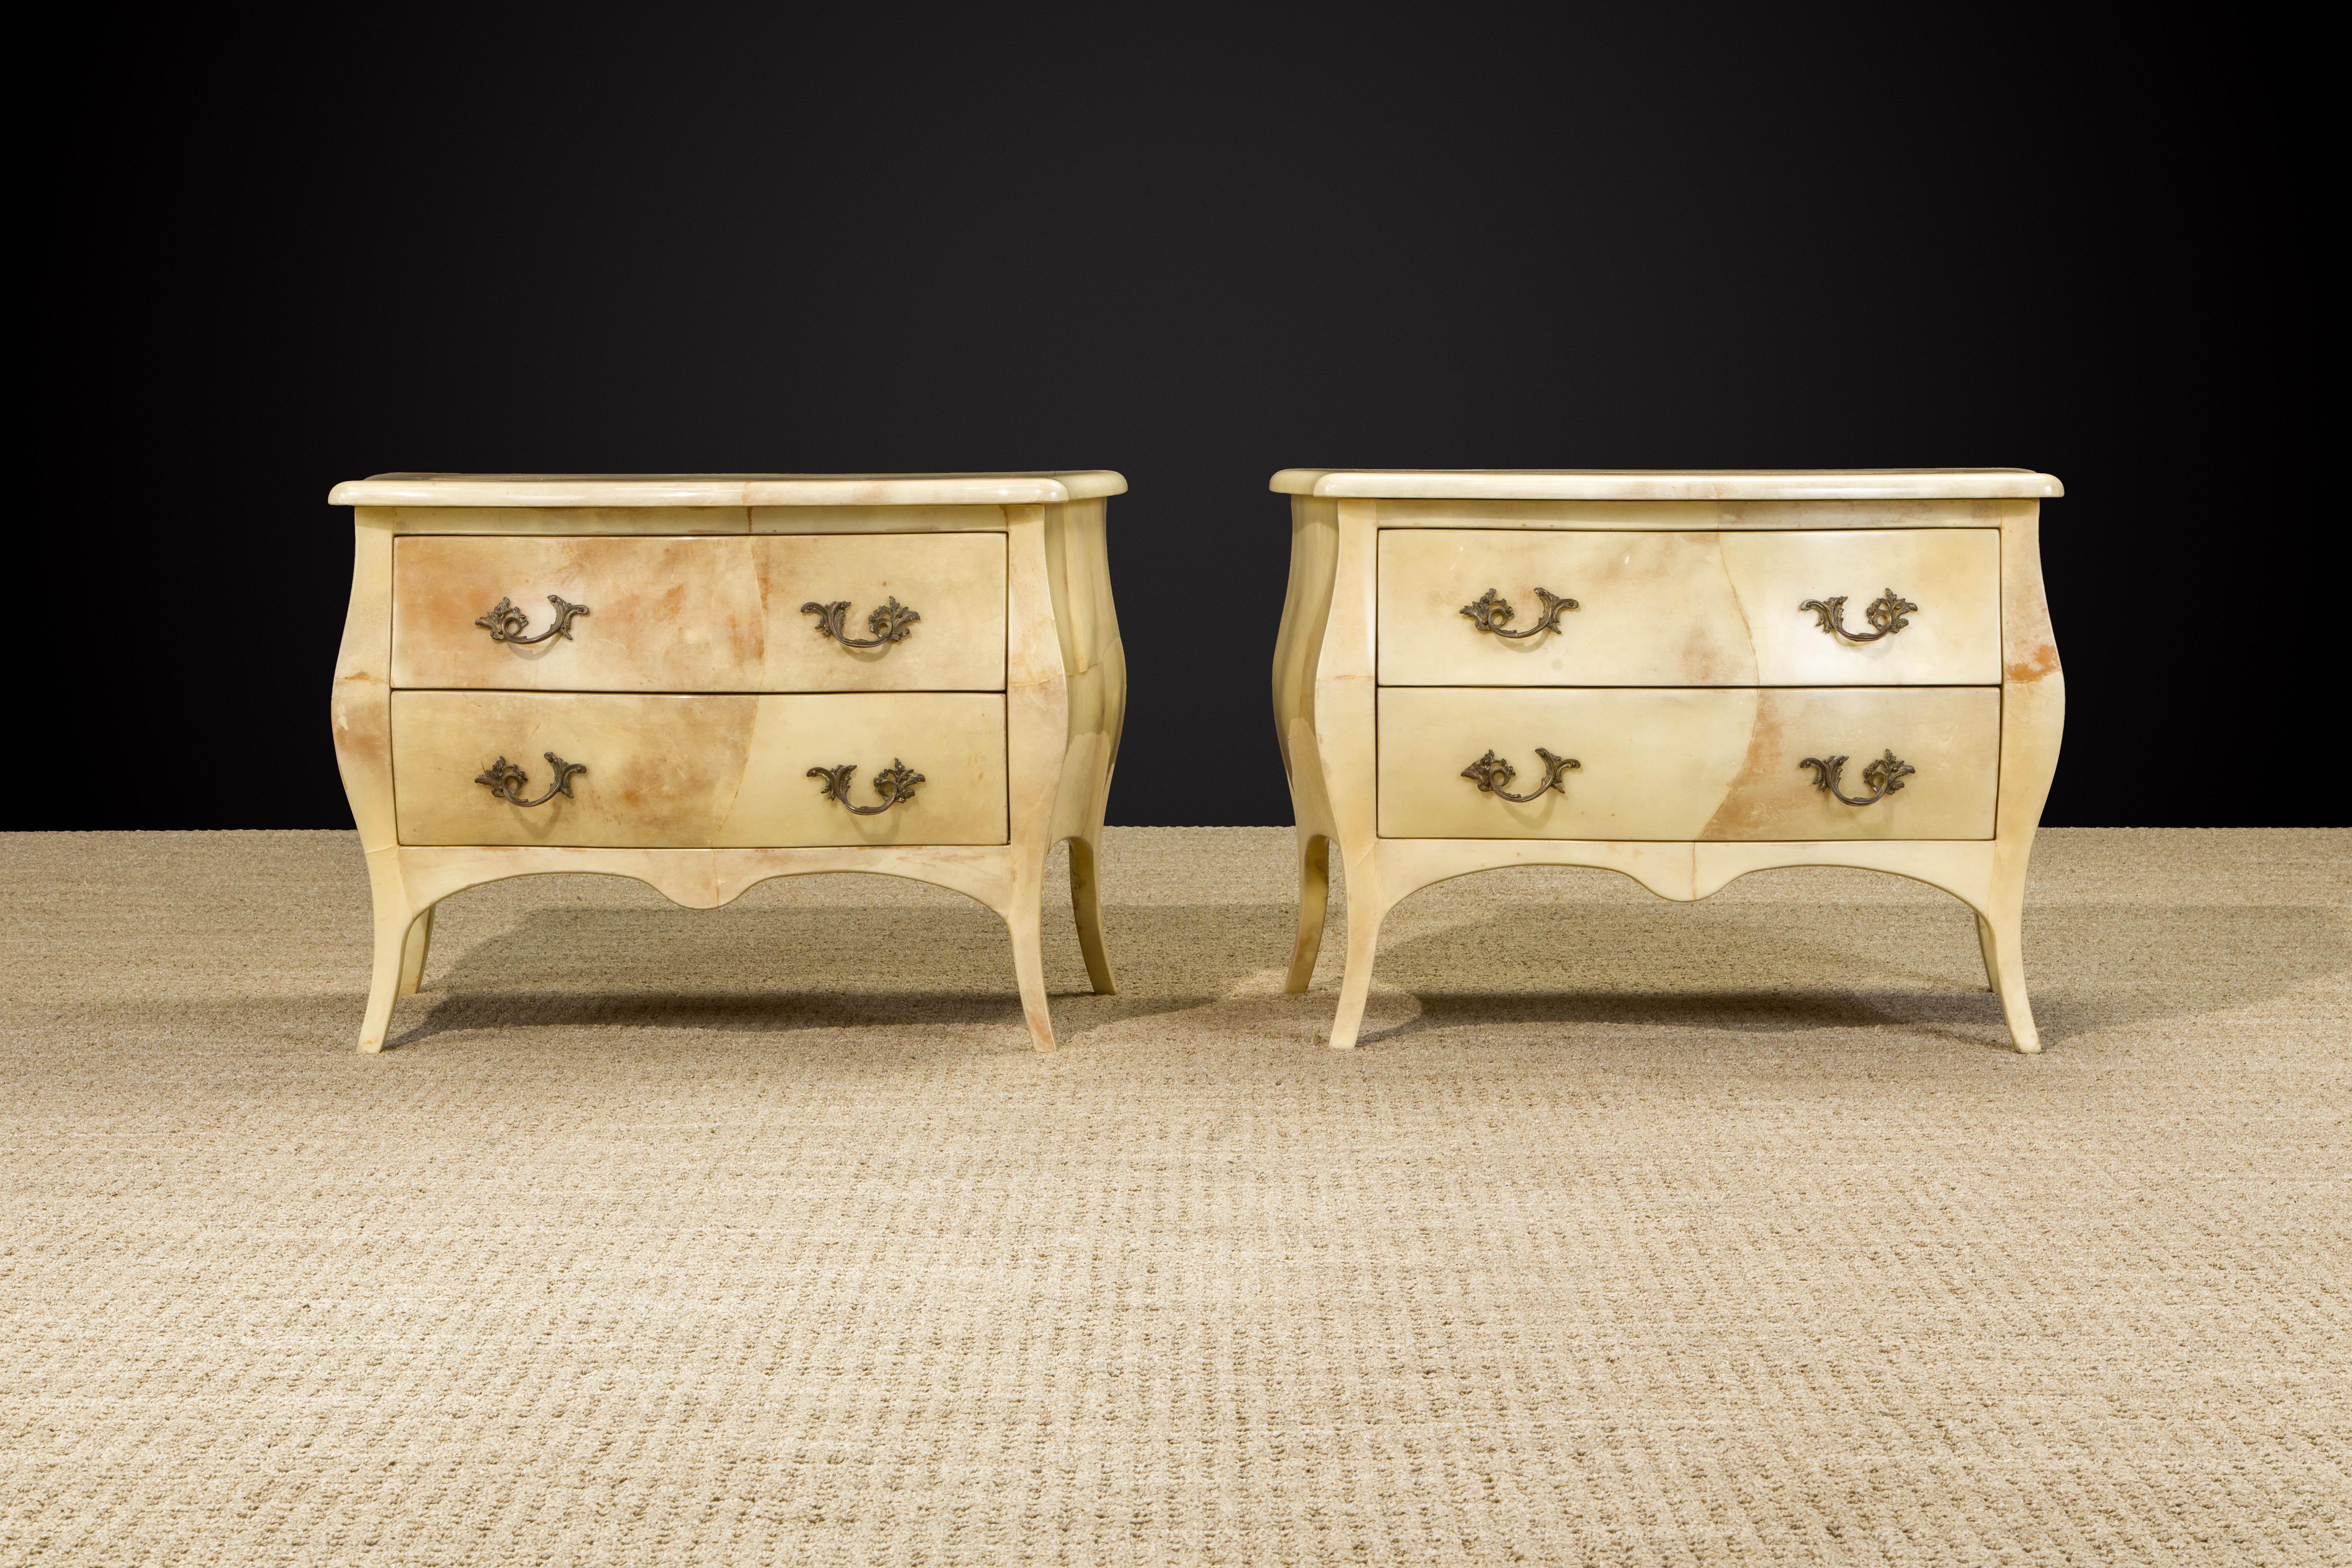 Exquisitely executed lacquered goatskin and brass nightstands by Colombian designer Enrique Garcel, circa 1970, signed with labels underneath. Smooth rounded edges and corners provide safety for the bedroom or living space for you and your little